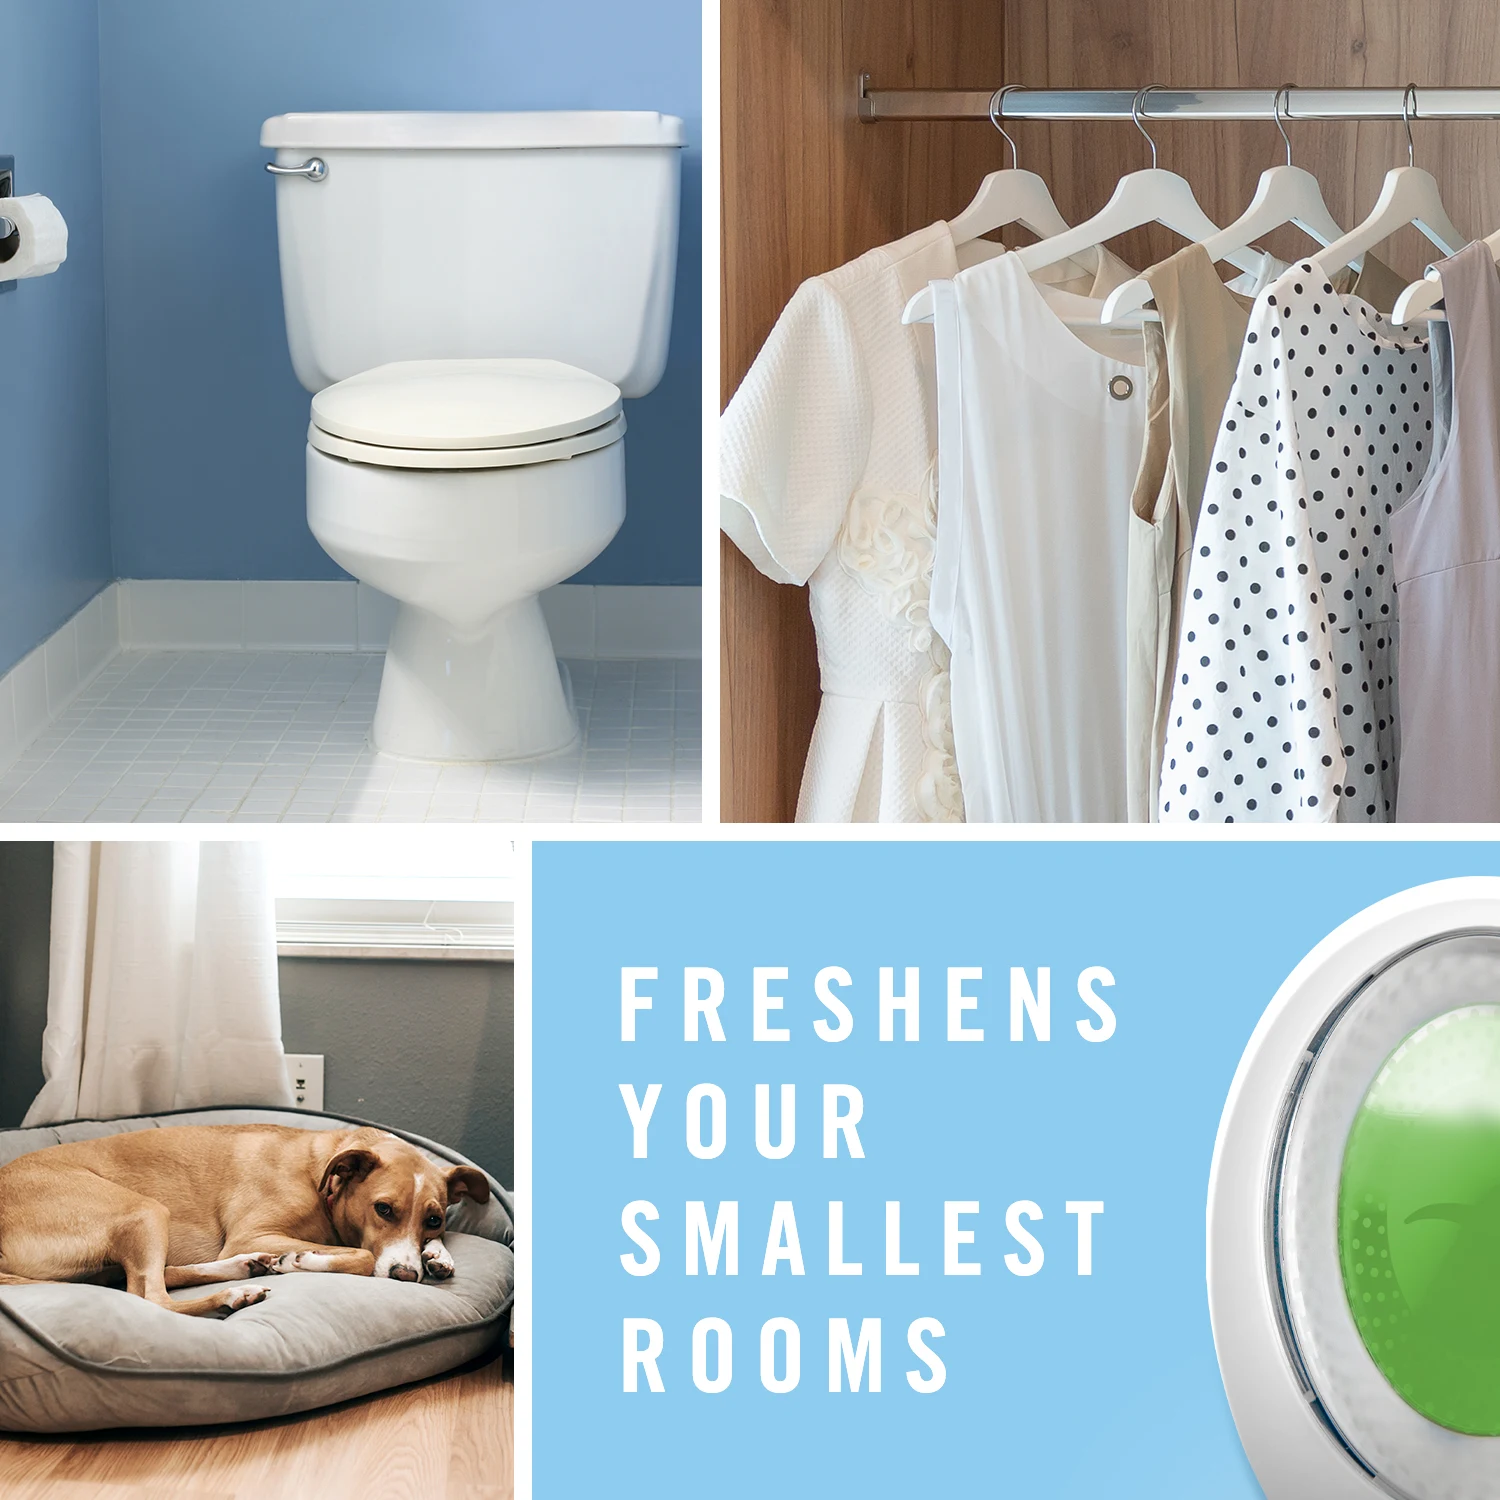 Freshens your smallest rooms